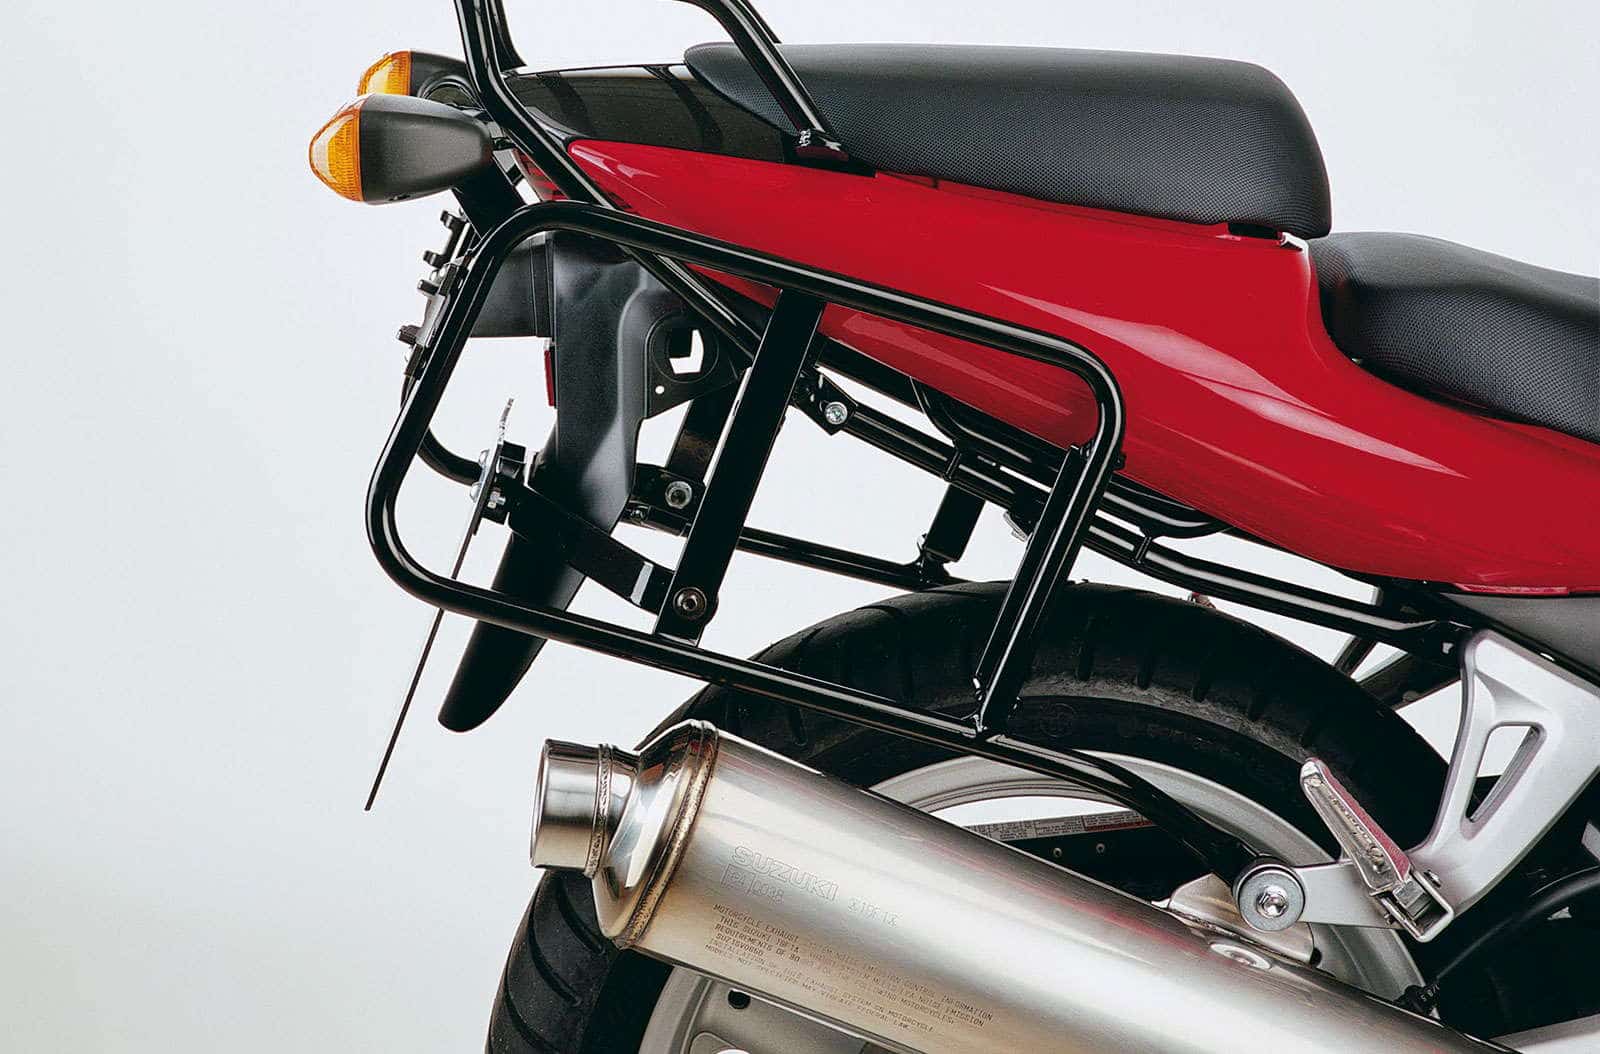 Sidecarrier permanent mounted black for Suzuki SV 650/S (1999-2002)